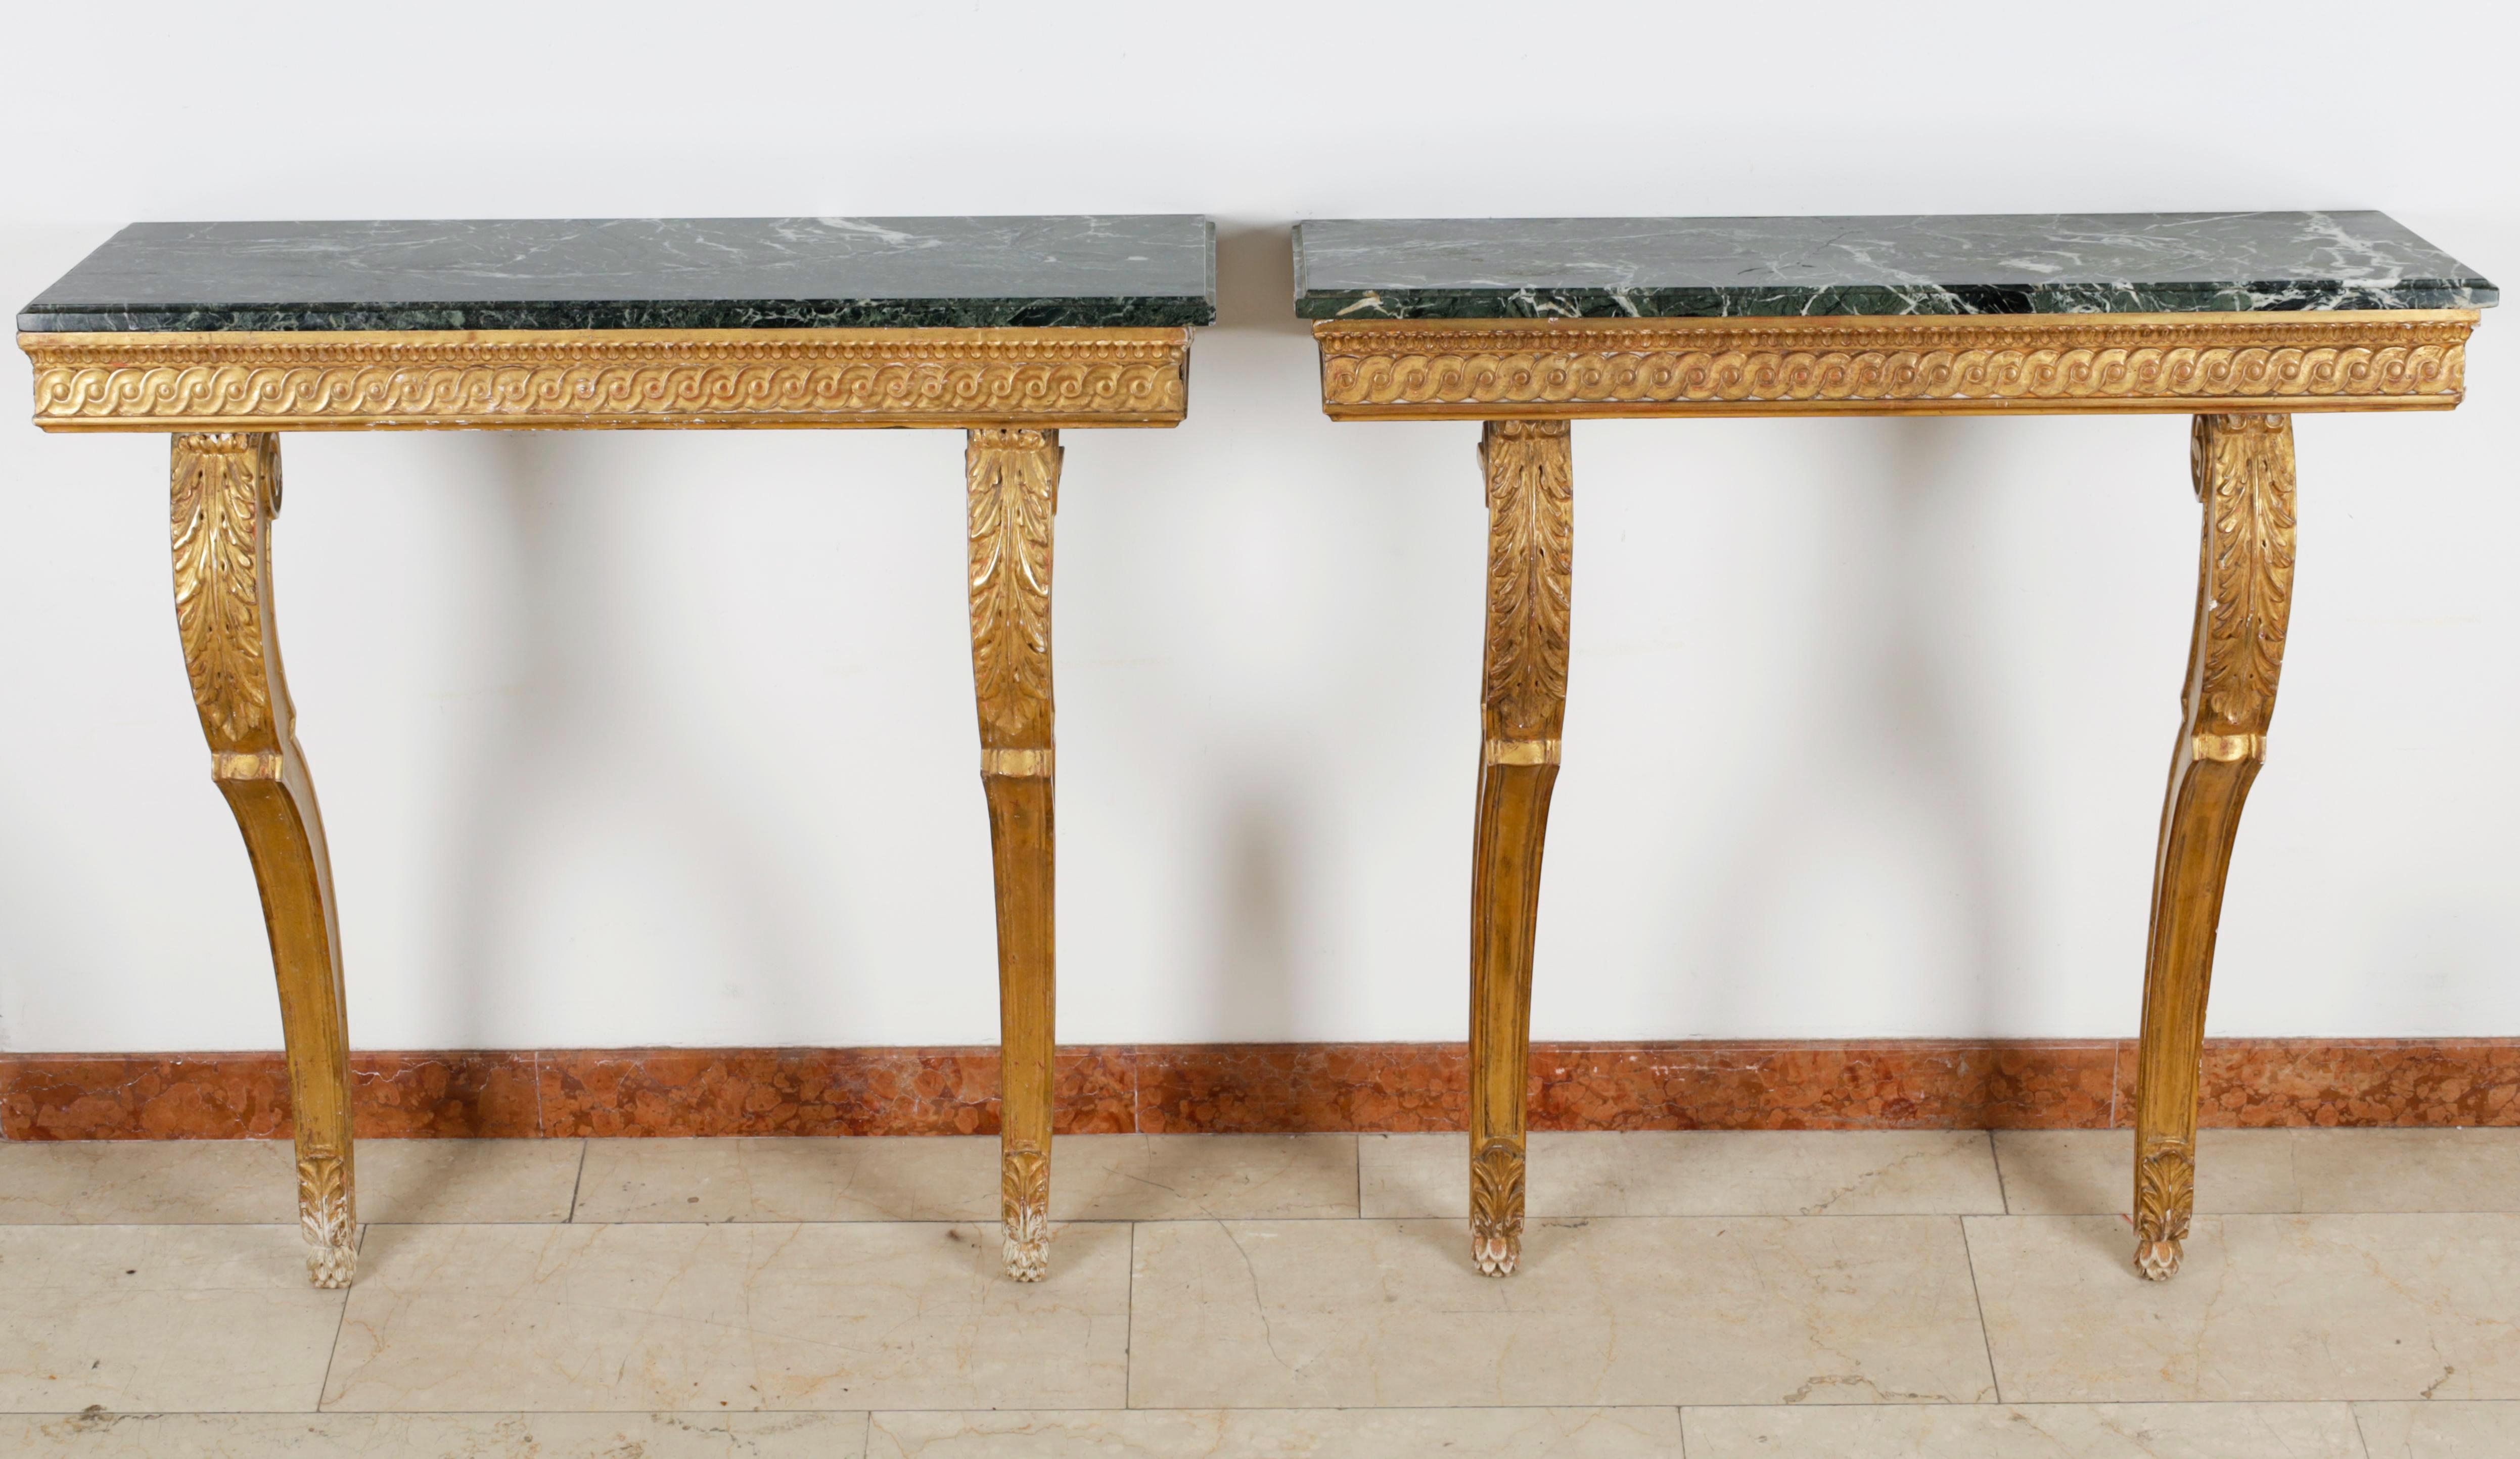 Hello,
We would like to offer you this elegant pair of French mid 19 century Louis XVI  with Sienna marble wall mounted consoles. The pieces stand on beautifully shaped legs that are gorgeously decorated with floral motifs. The cornice of the